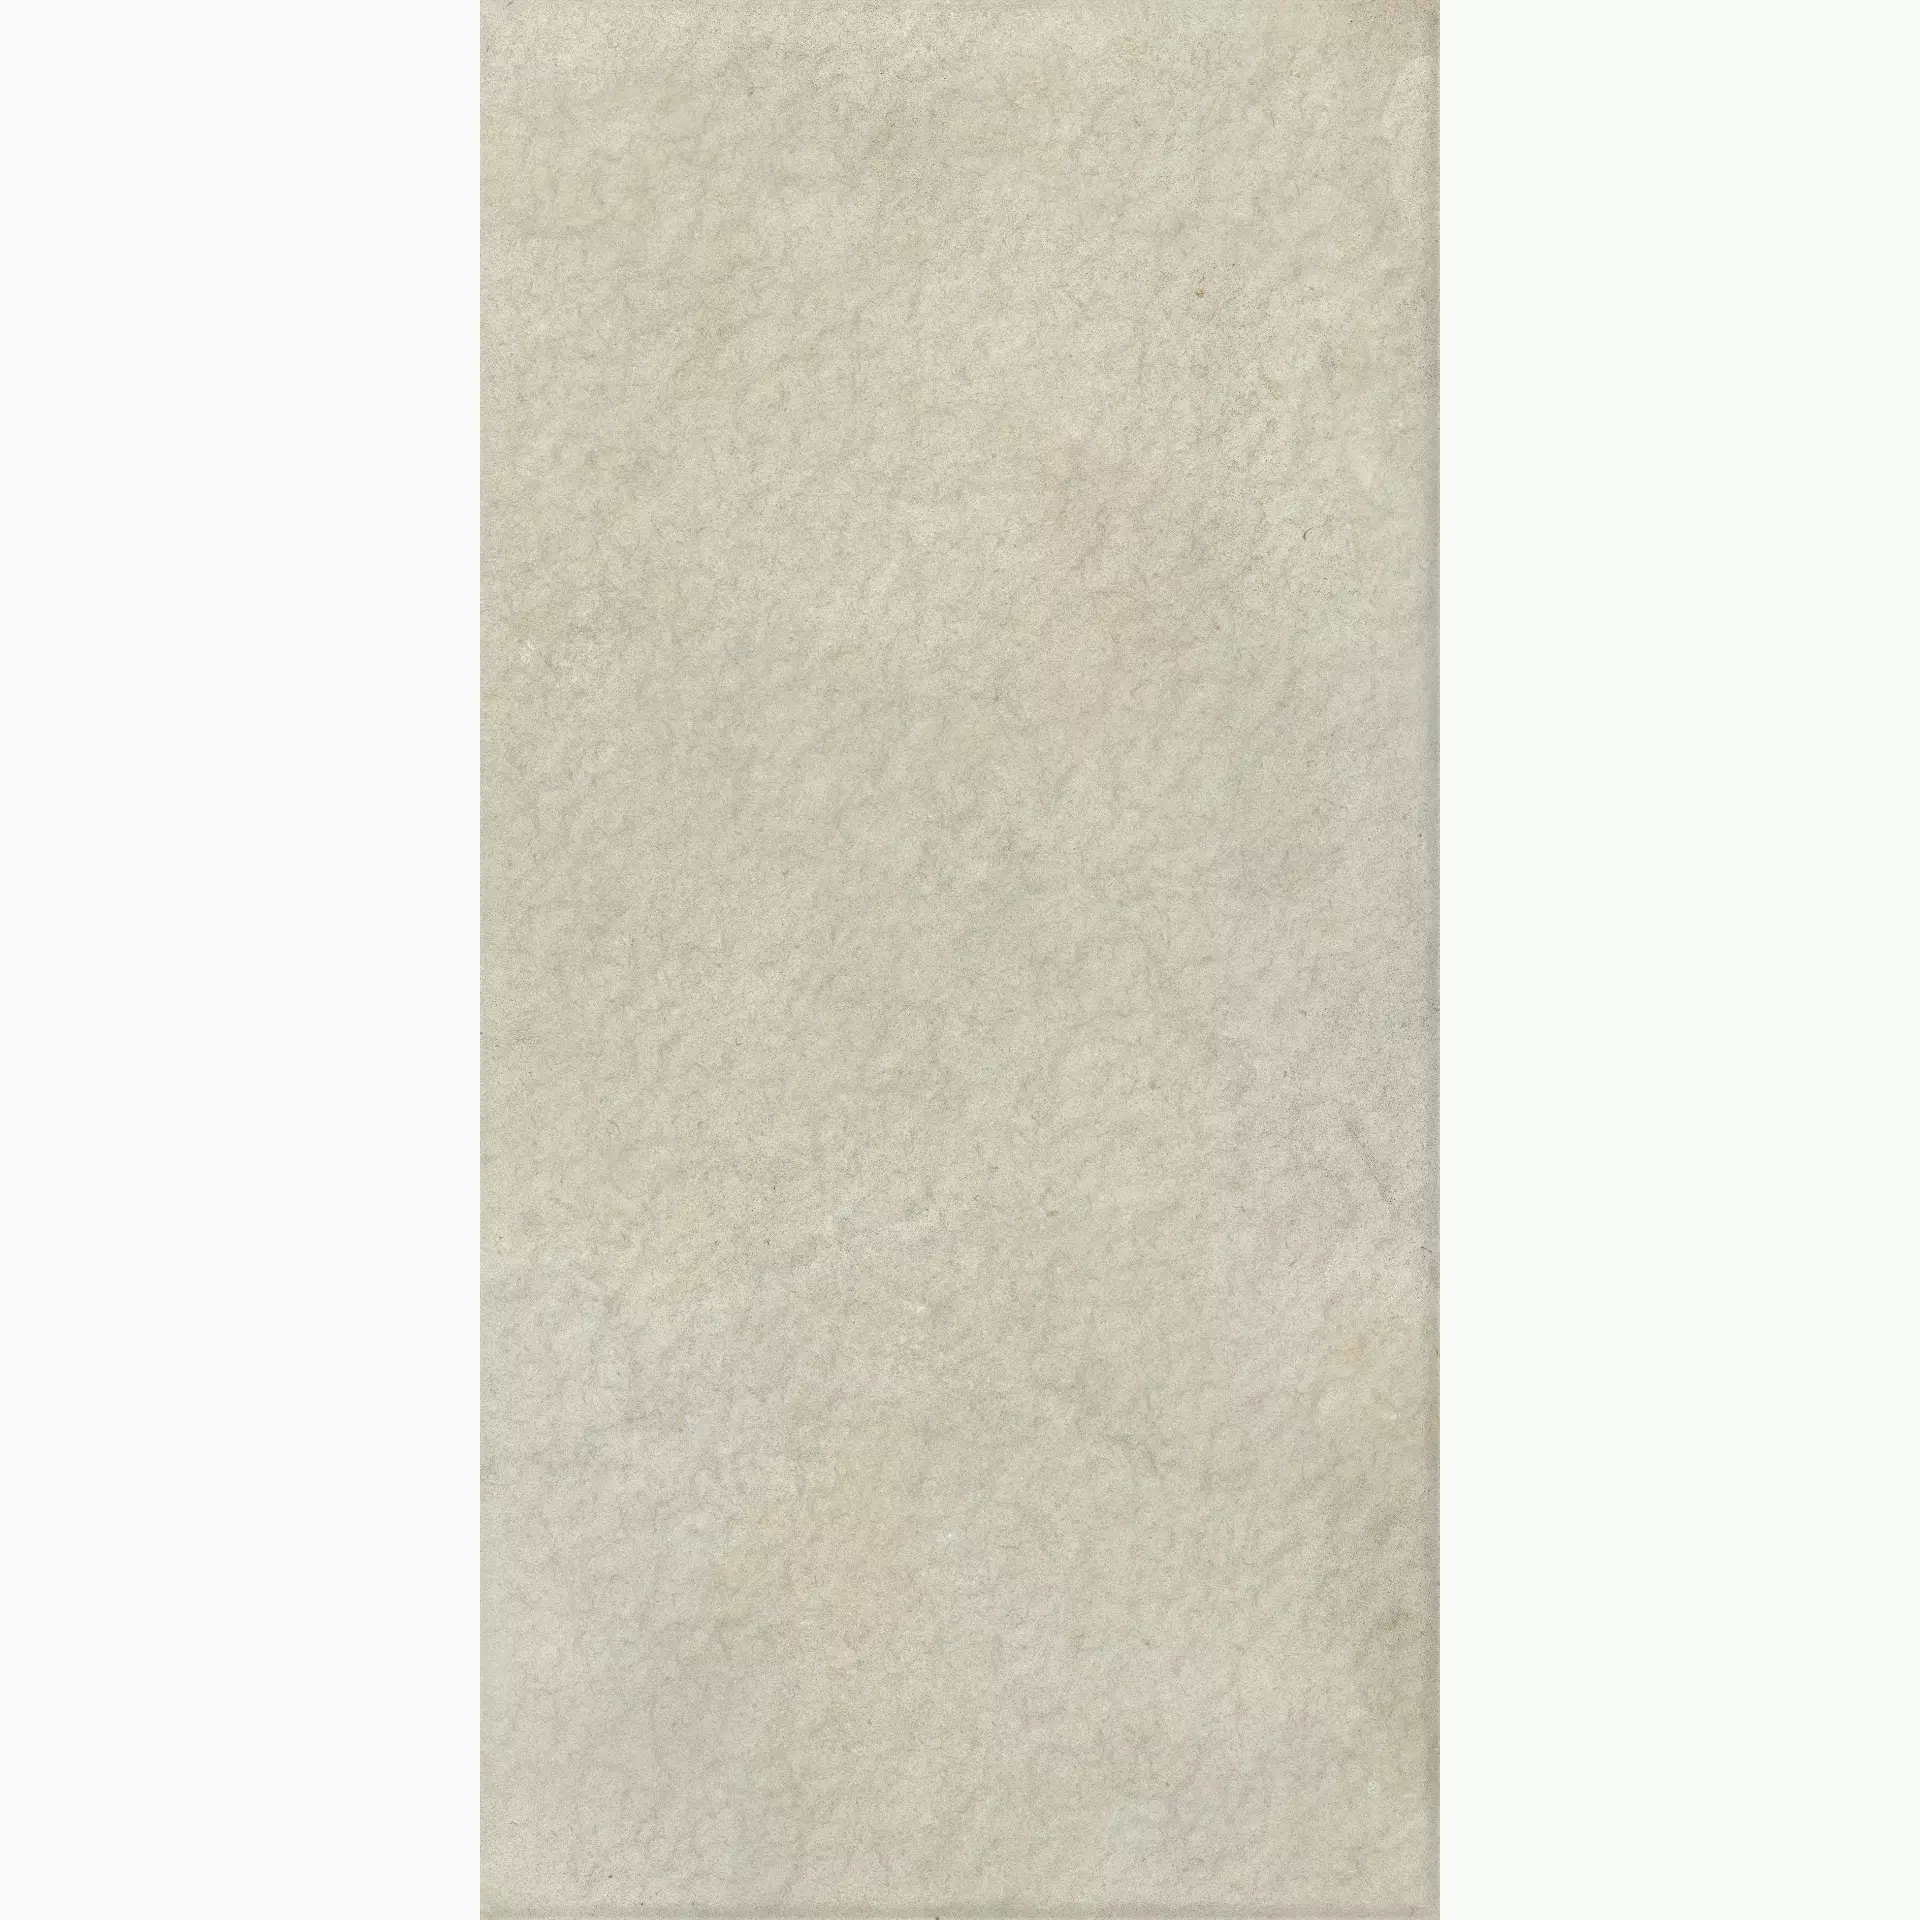 Refin Sublime Beige Out 2.0 OT51 60x120cm rectified 20mm